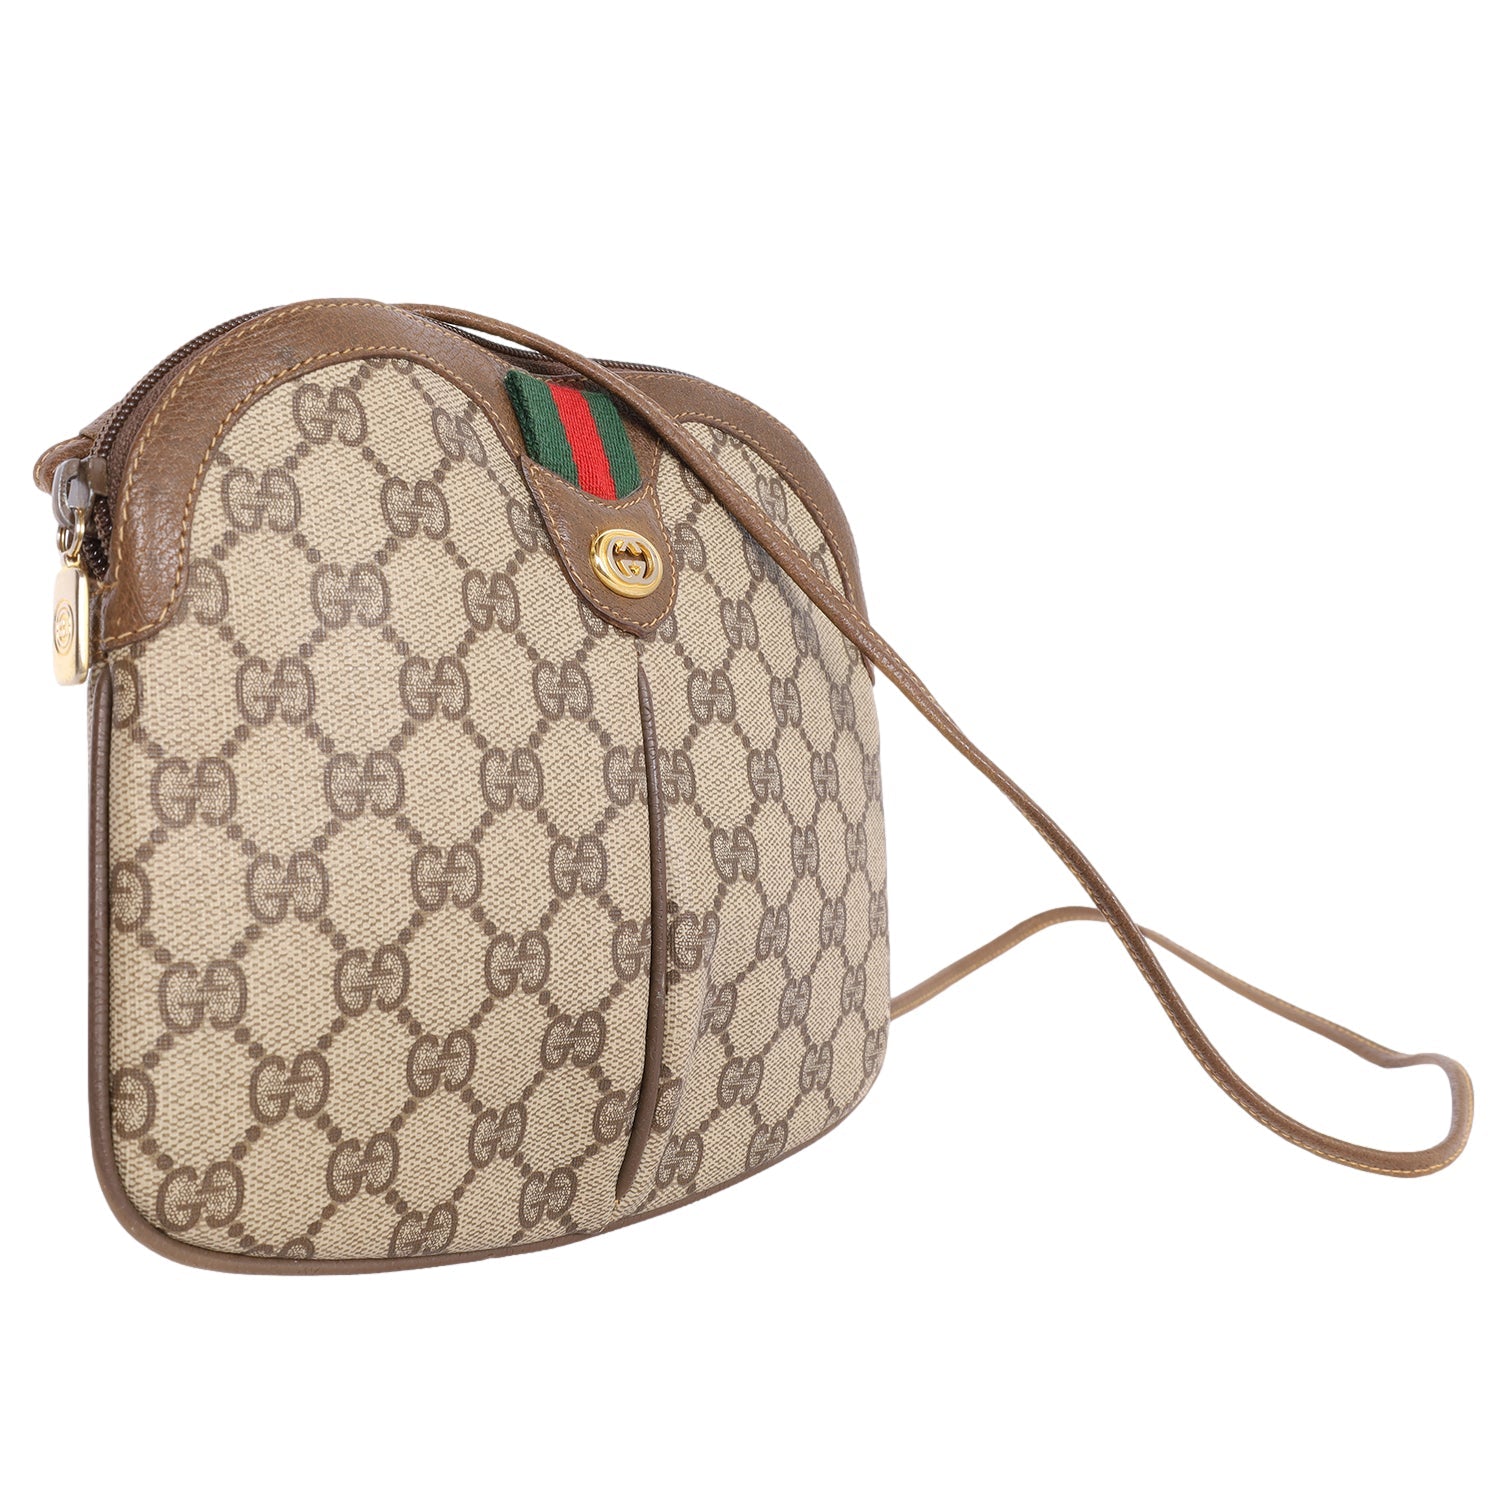 Gucci Black Pebbled Leather Boston Bag with Green Red Green Web